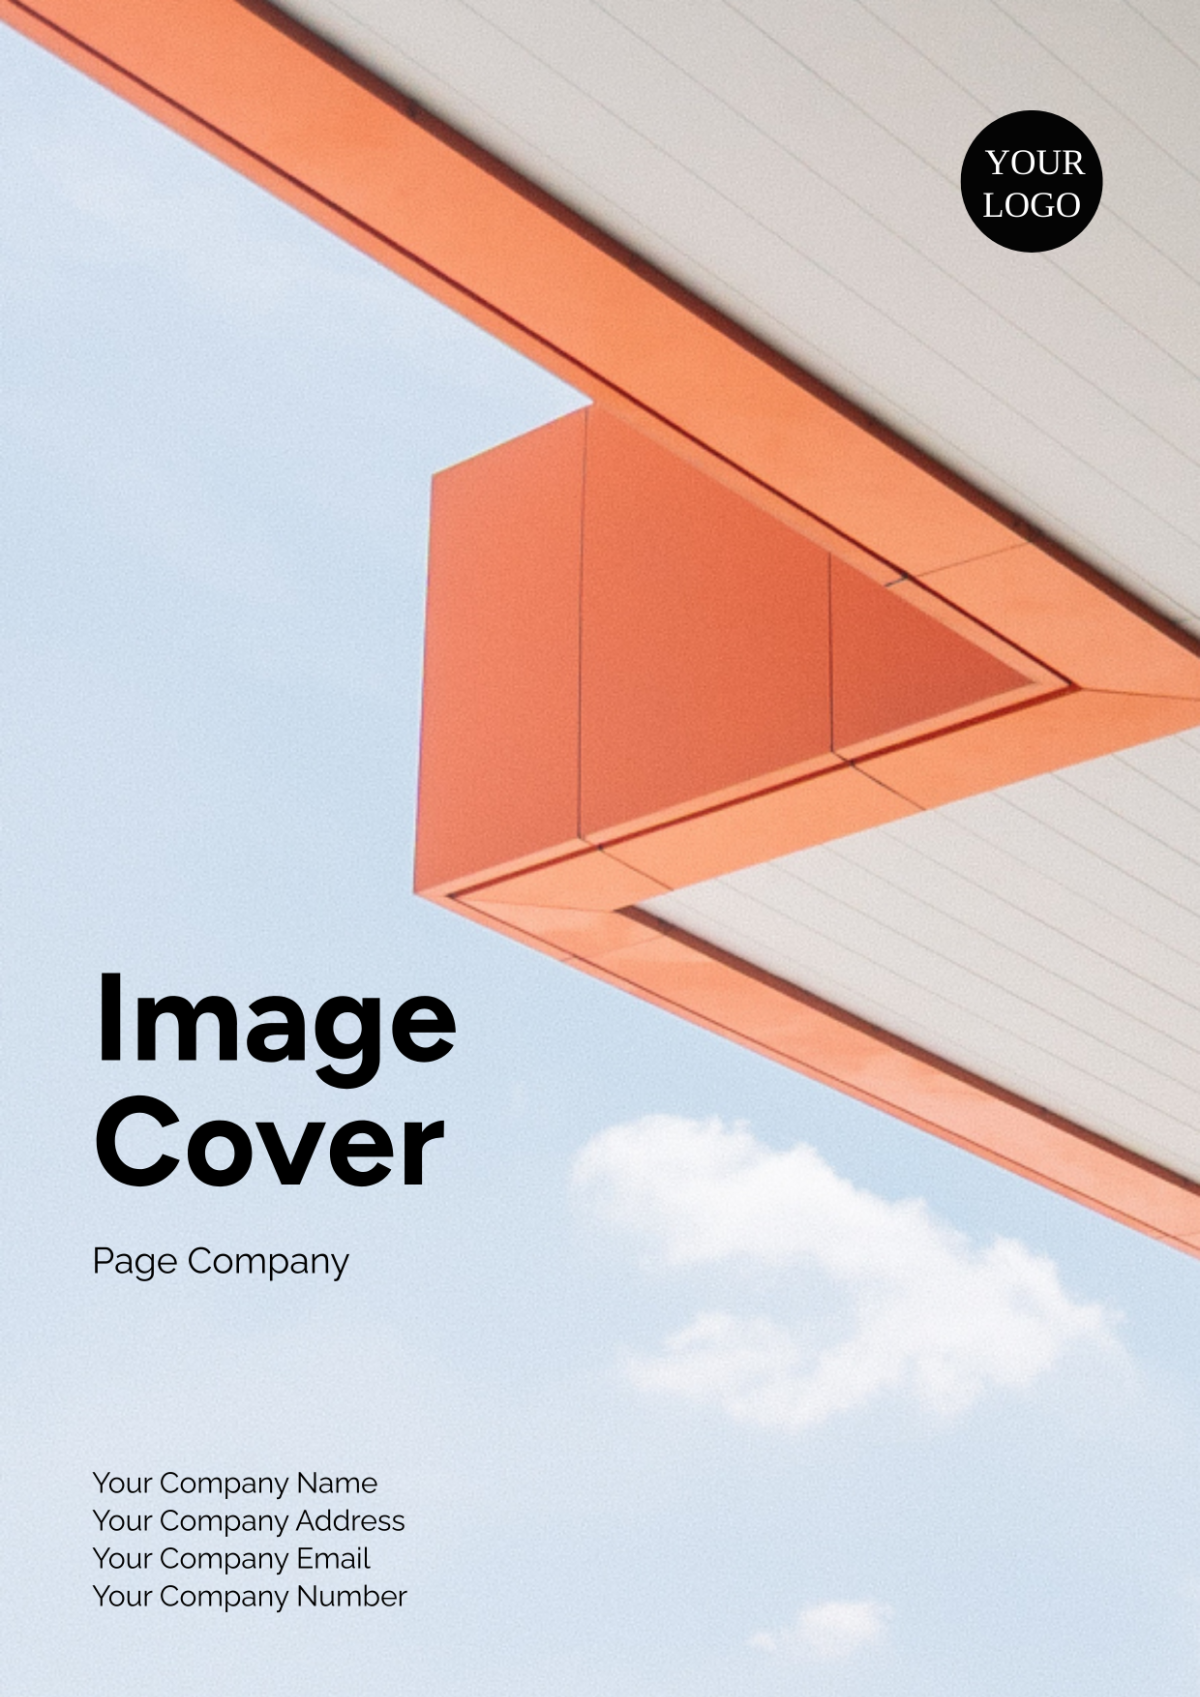 Image Cover Page Company